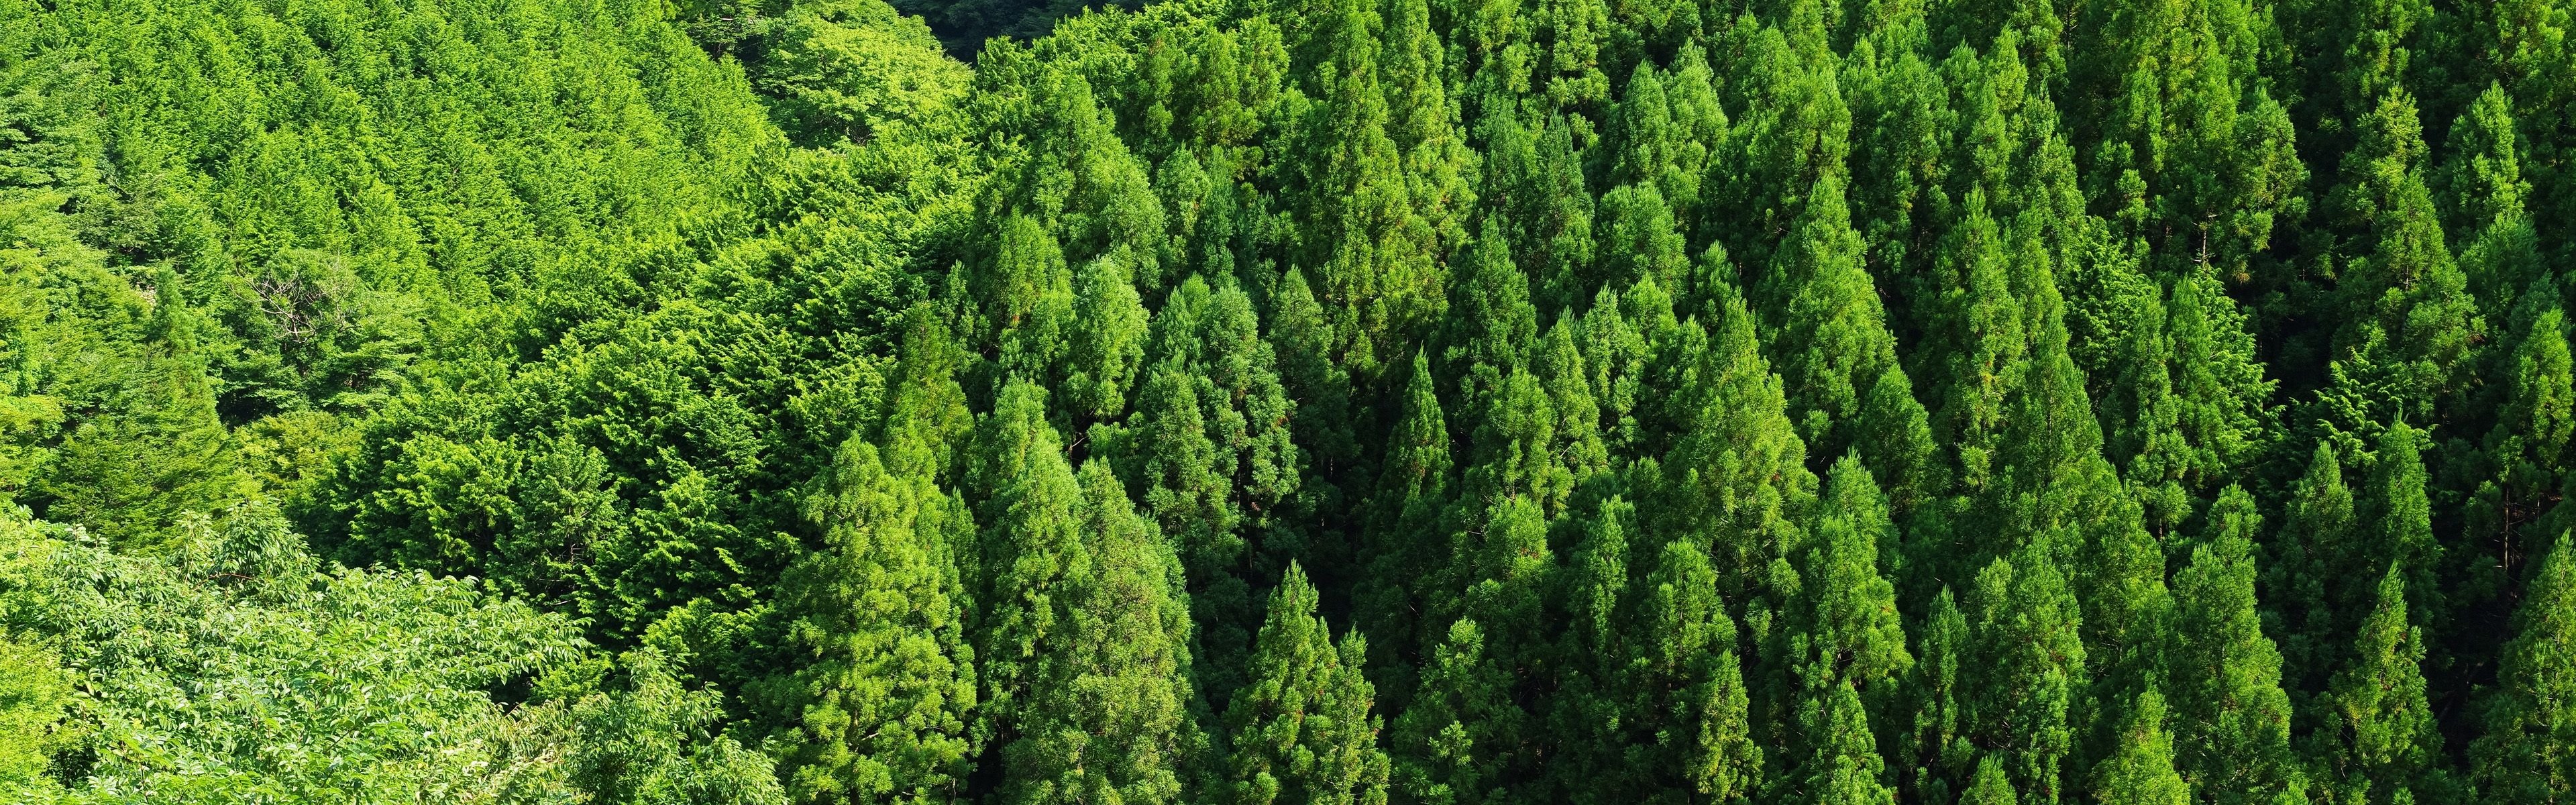 Wallpaper Green forest, trees, top view 3840x2160 UHD 4K Picture, Image